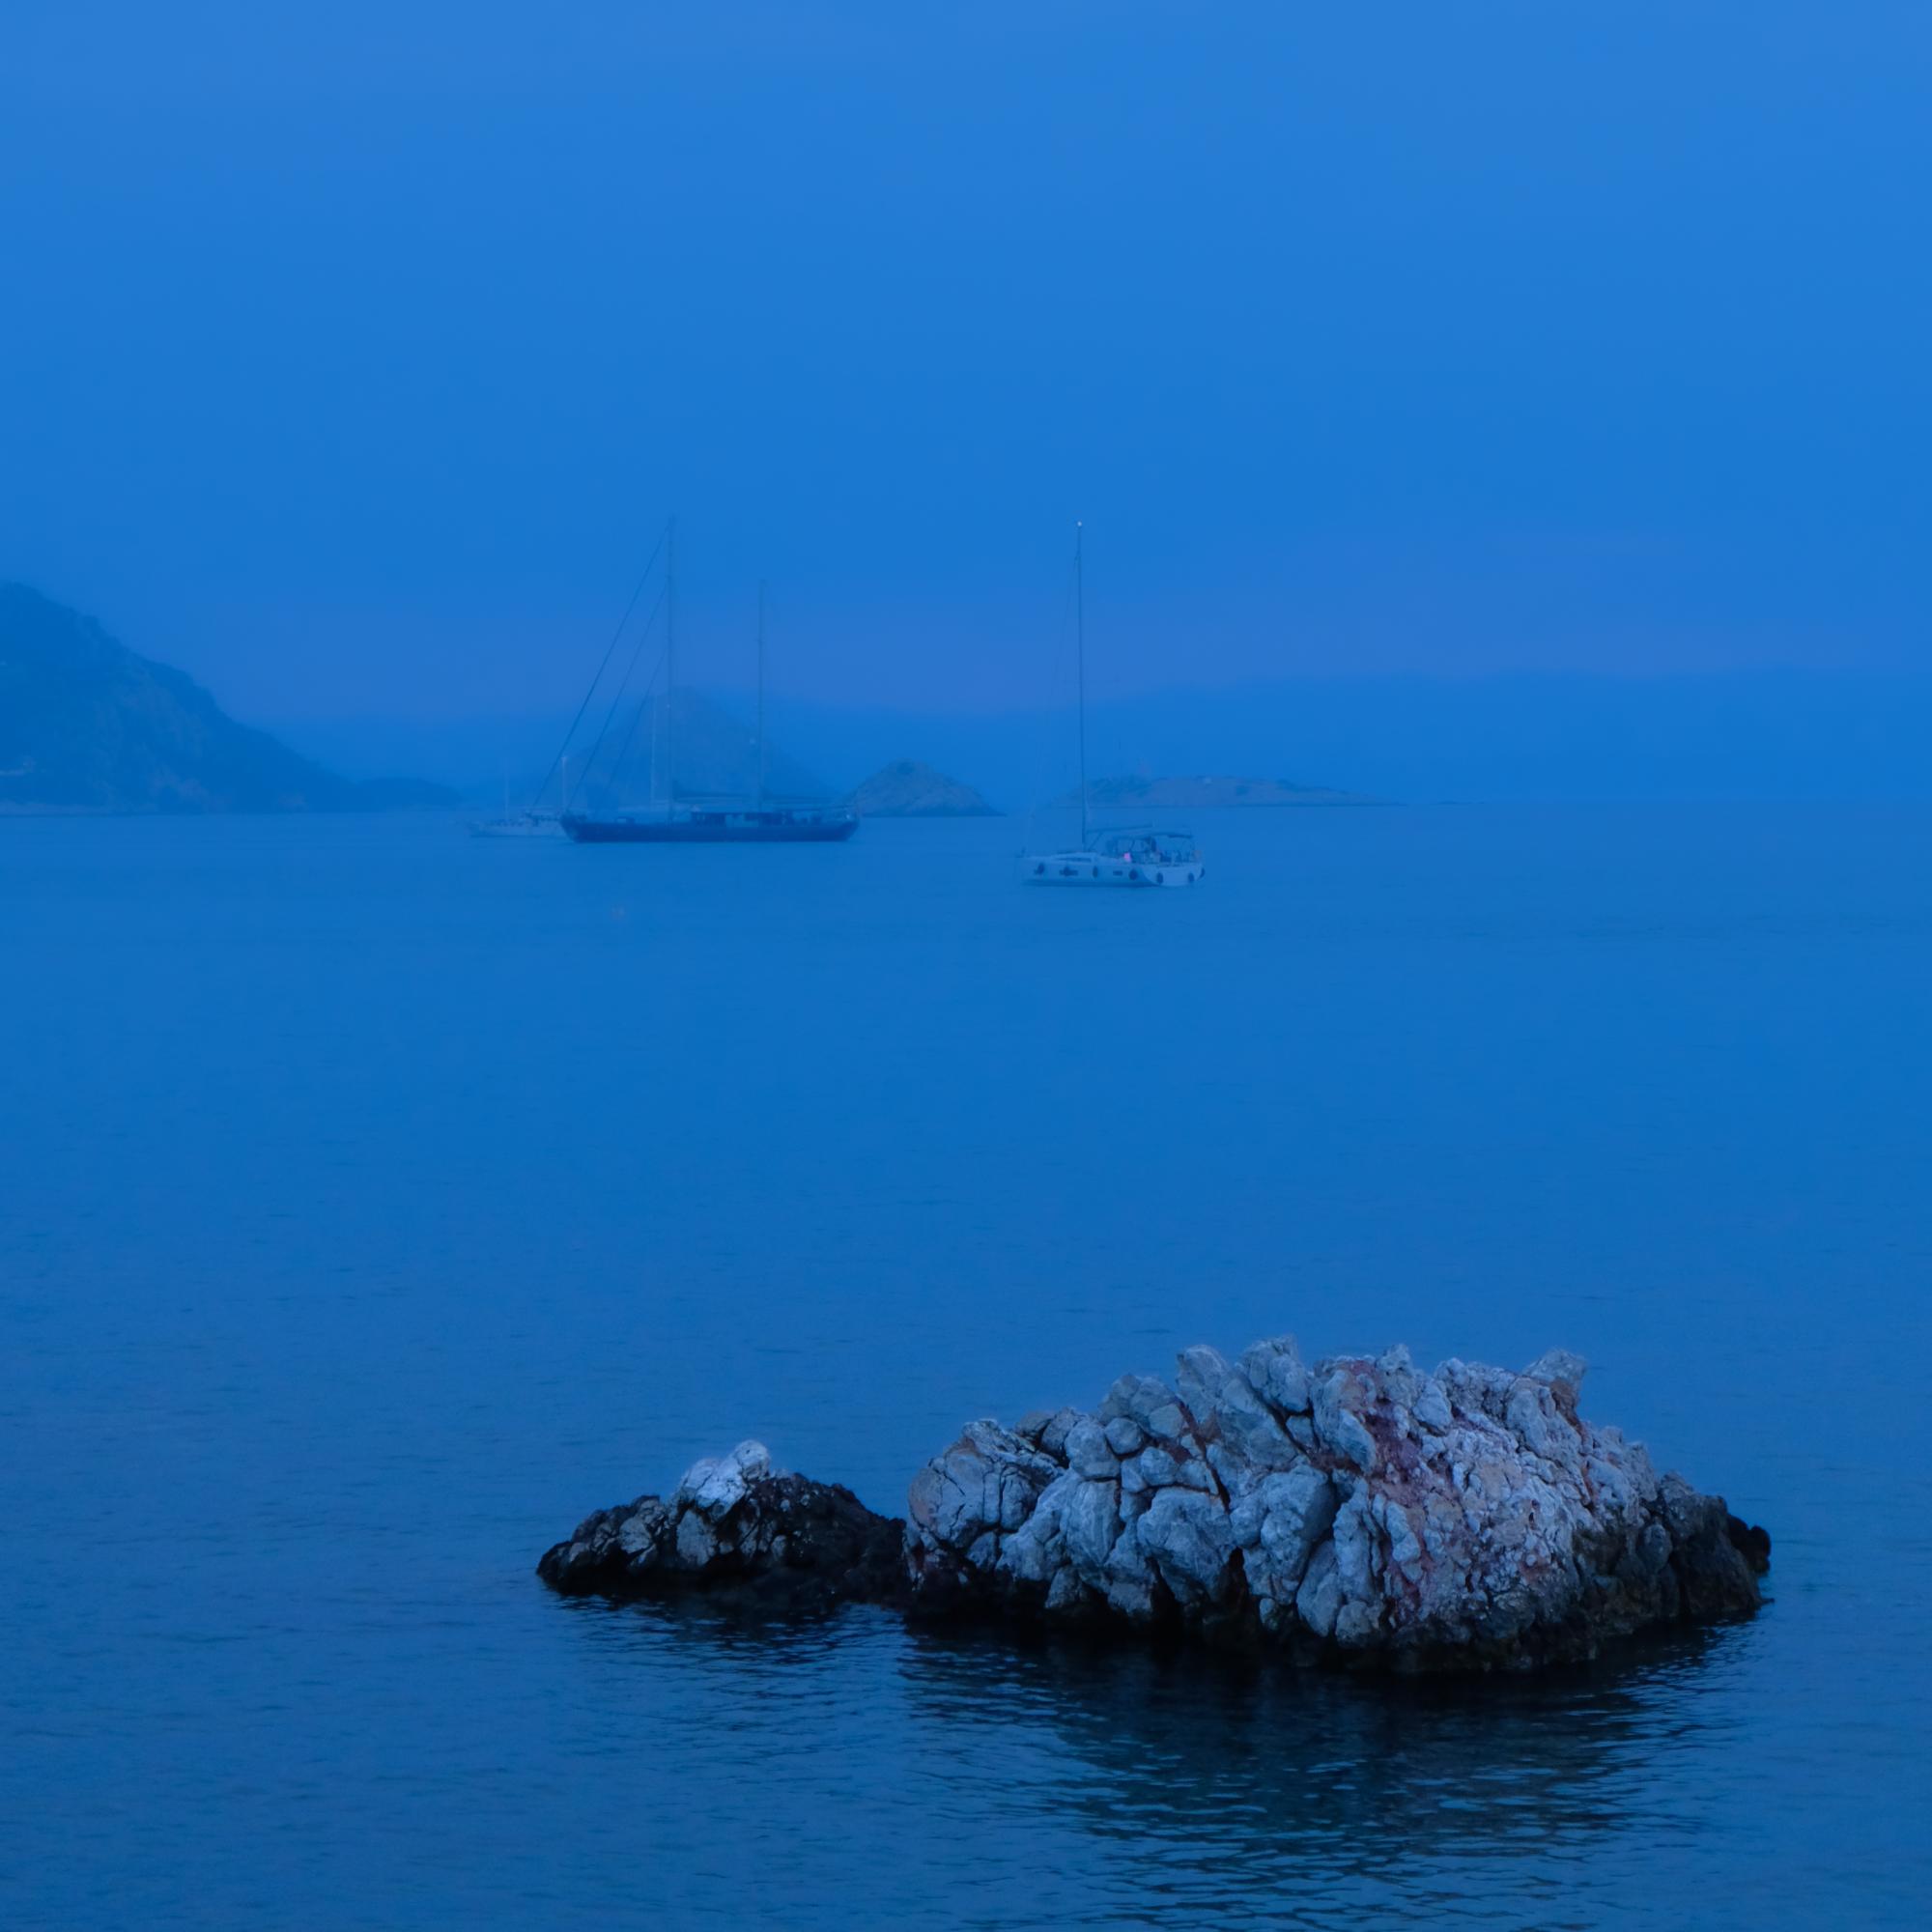 Photograph of a hazy blue sea with rocks in the foreground and large sailboats in the background